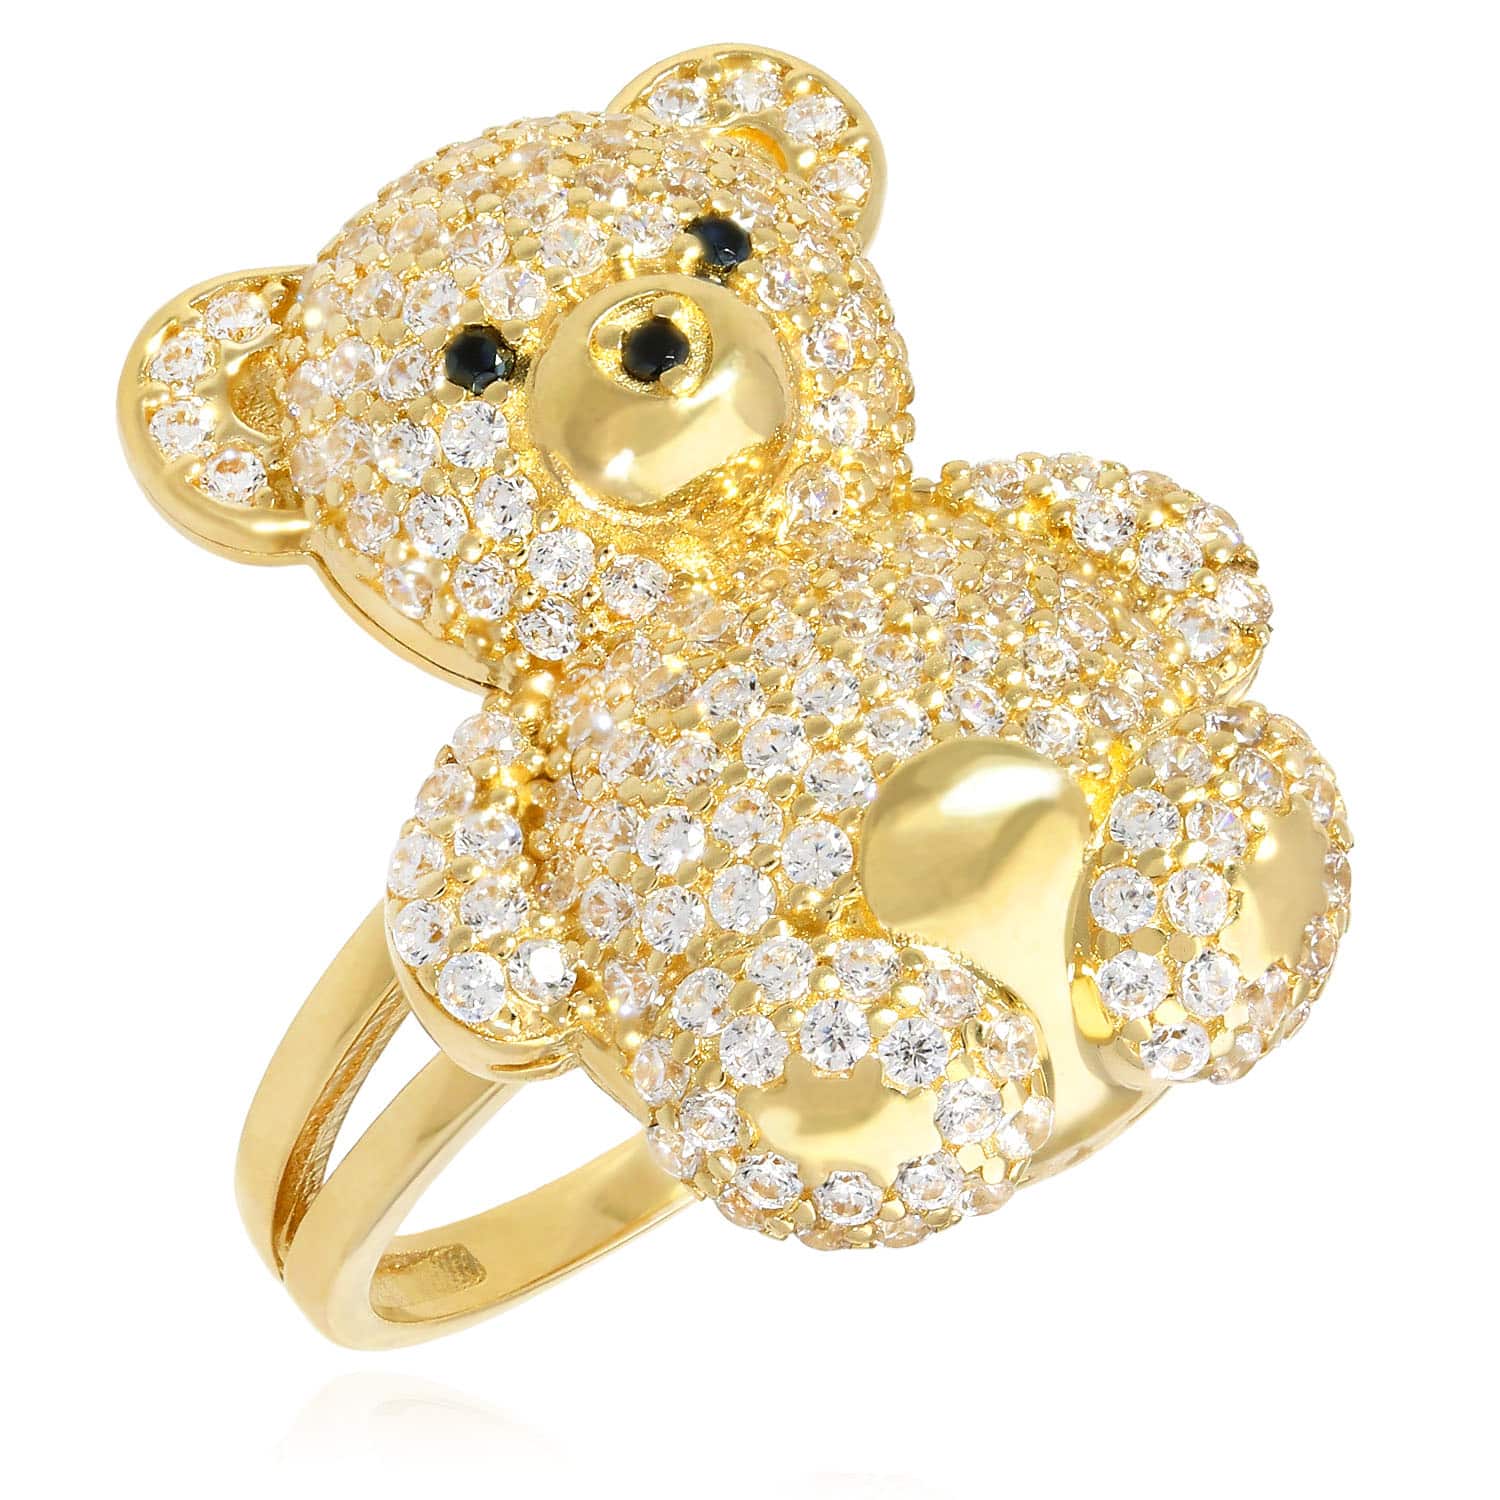 14K Yellow Gold Simulated Diamond Pave Puffed Teddy Bear Ring | WJD  Exclusives